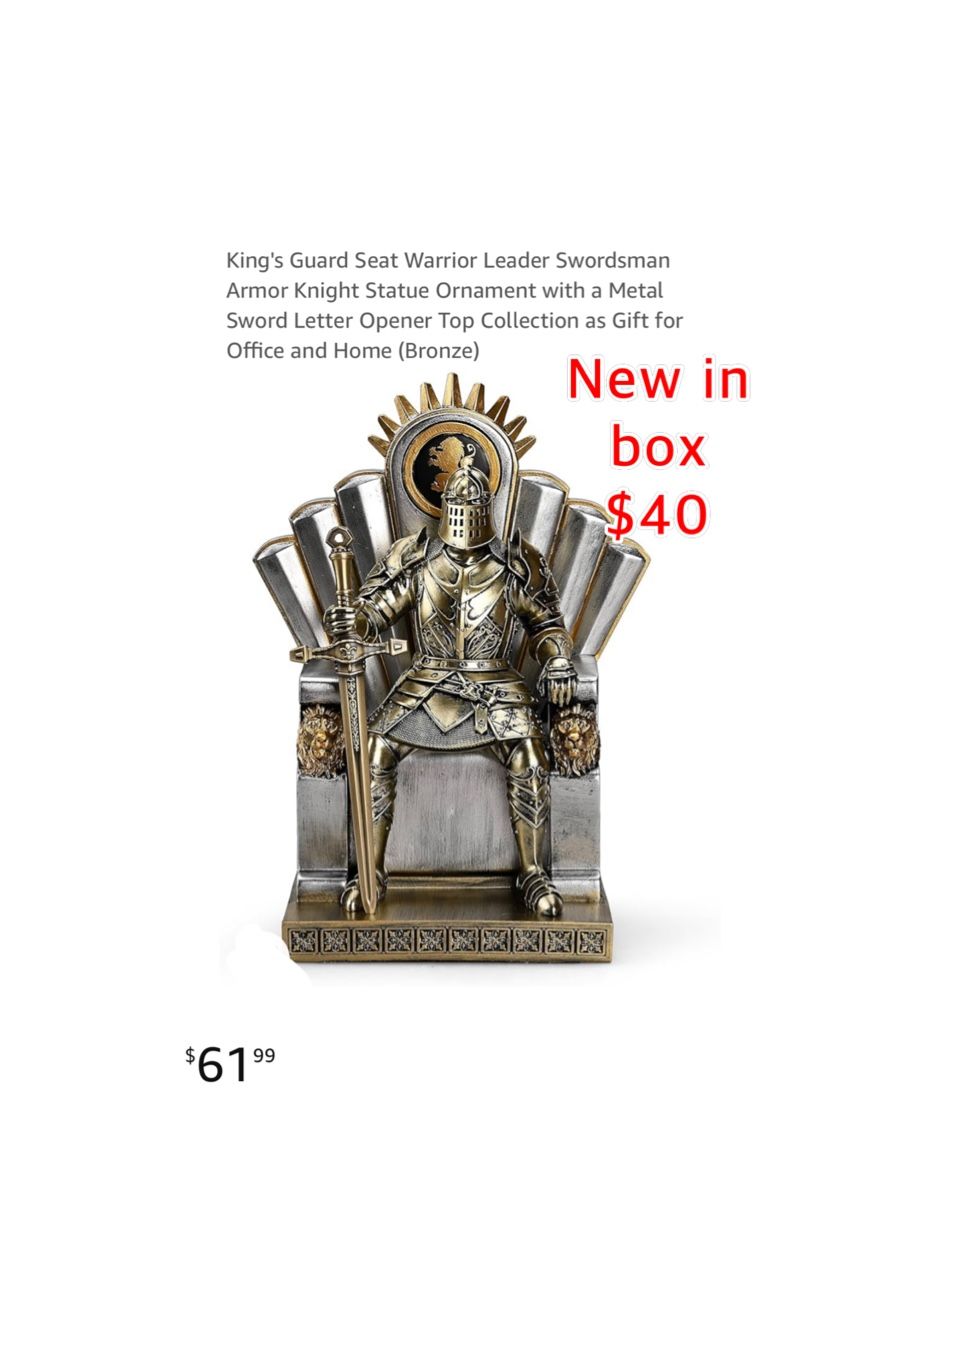 New King's Guard Seat Warrior Leader Swordsman Armor Knight Statue with a Metal Sword Letter Opener Top Collection as Gift for Office and Home $40